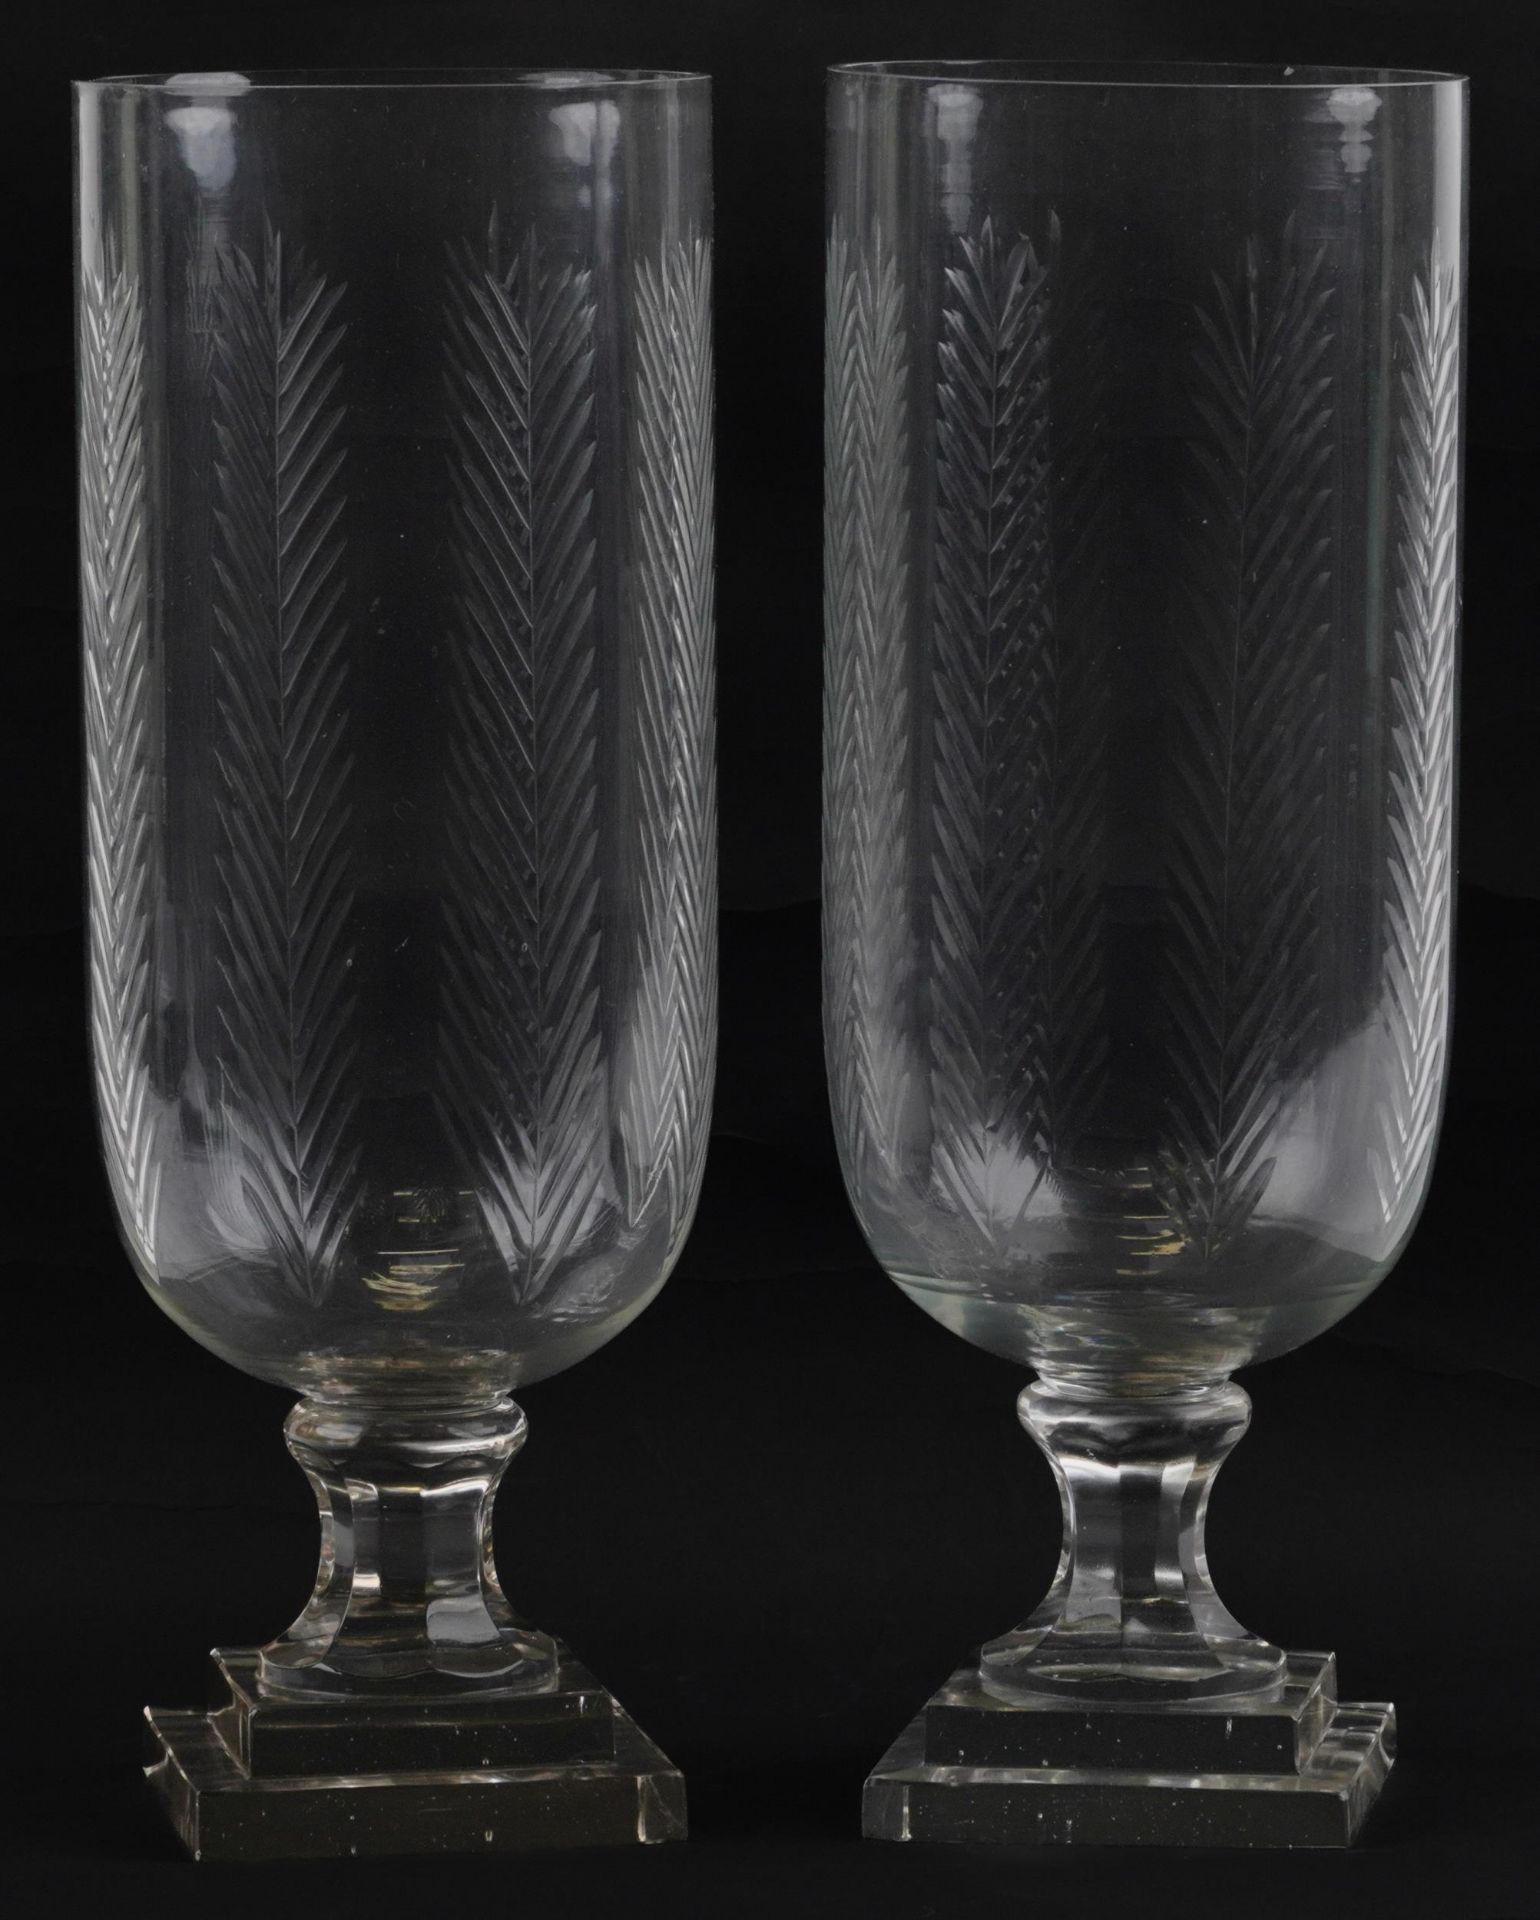 Pair of Regency style celery glass vases on square stepped bases, each 40.5cm high : For further